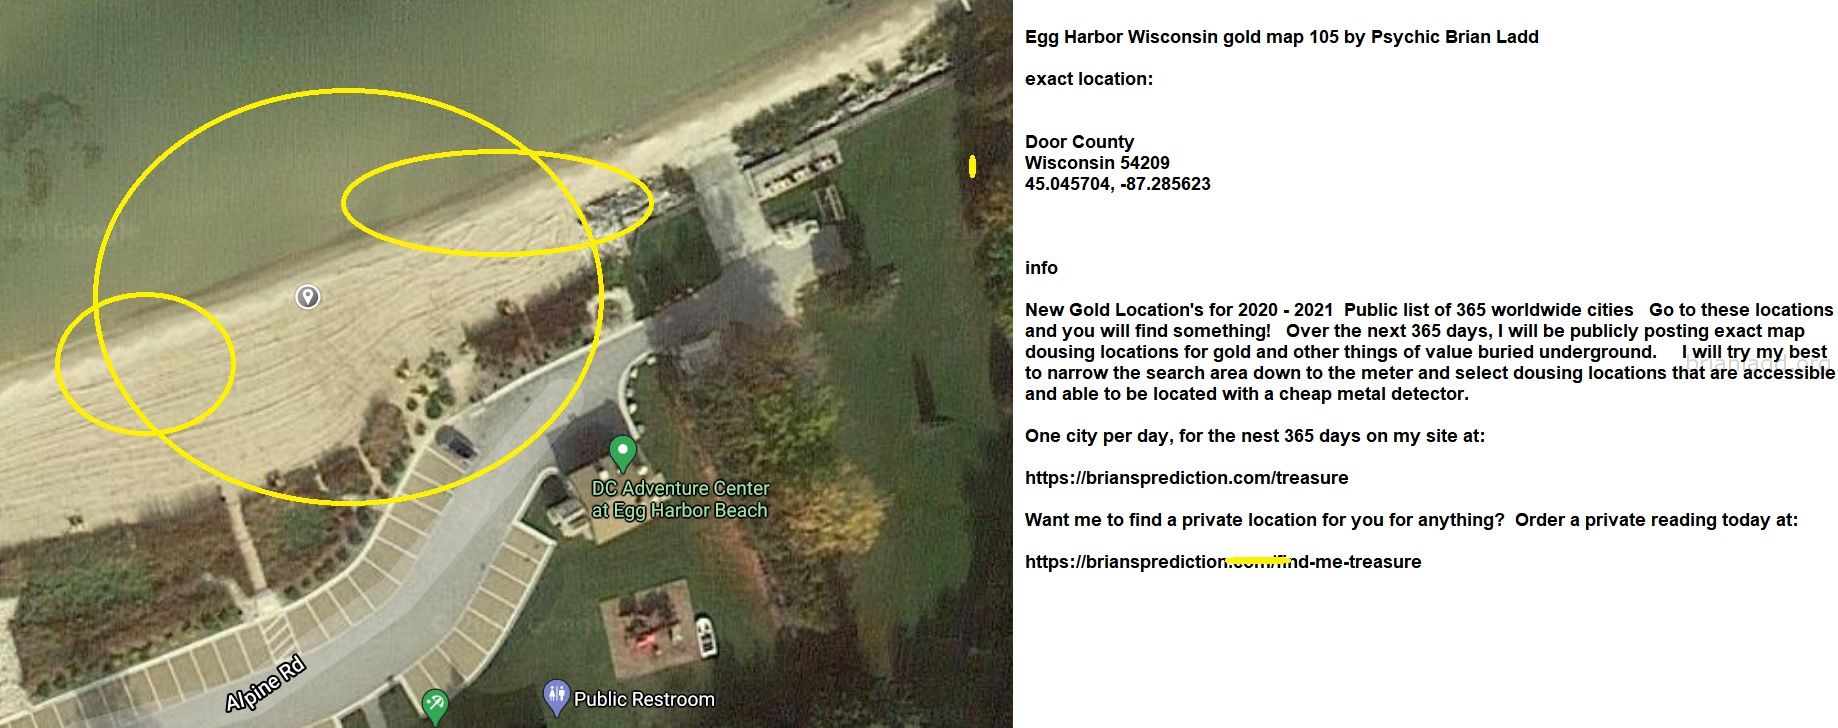 Egg Harbor Wisconsin Gold Map 105 By Psychic Brian Ladd - Egg Harbor Wisconsin Gold Map 105 By Psychic Brian Ladd  Exact...
Egg Harbor Wisconsin Gold Map 105 By Psychic Brian Ladd  Exact Location:  Door County  Wisconsin 54209  45.045704, -87.285623  Info  New Gold Location'S For 2020 - 2021  Public List Of 365 Worldwide Cities  Go To These Locations And You Will Find Something!  Over The Next 365 Days, I Will Be Publicly Posting Exact Map Dousing Locations For Gold And Other Things Of Value Buried Underground.  I Will Try My Best To Narrow The Search Area Down To The Meter And Select Dousing Locations That Are Accessible And Able To Be Located With A Cheap Metal Detector.  One City Per Day, For The Nest 365 Days On My Site At:   https://briansprediction.com/Treasure  Want Me To Find A Private Location For You For Anything?  Order A Private Reading Today At:   https://briansprediction.com/Find-Me-Treasure
